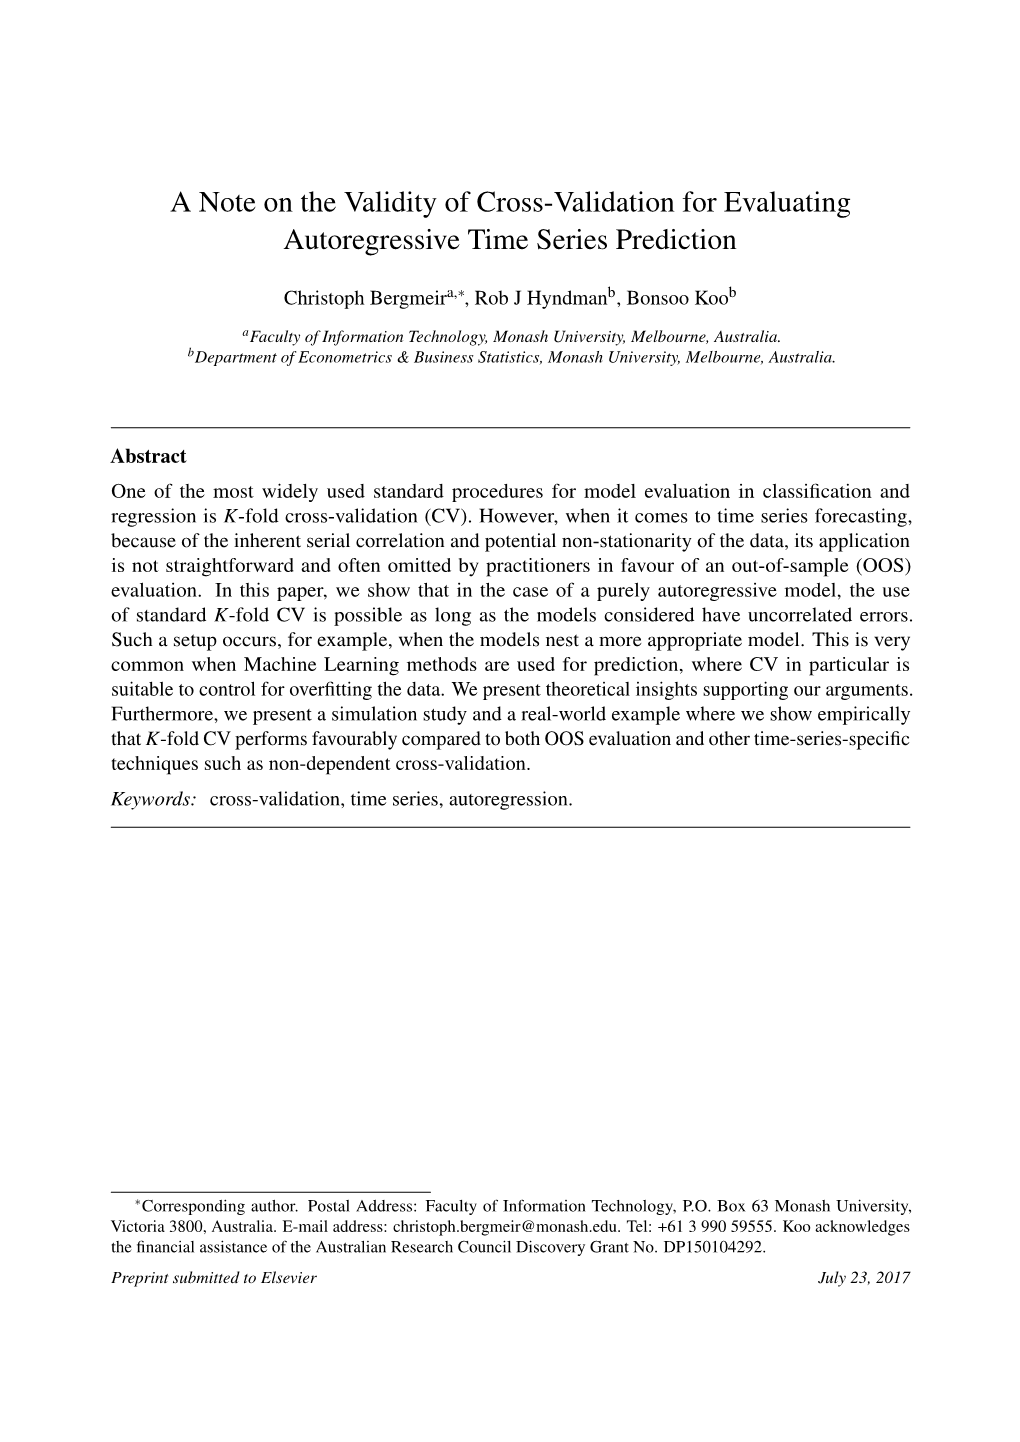 A Note on the Validity of Cross-Validation for Evaluating Autoregressive Time Series Prediction